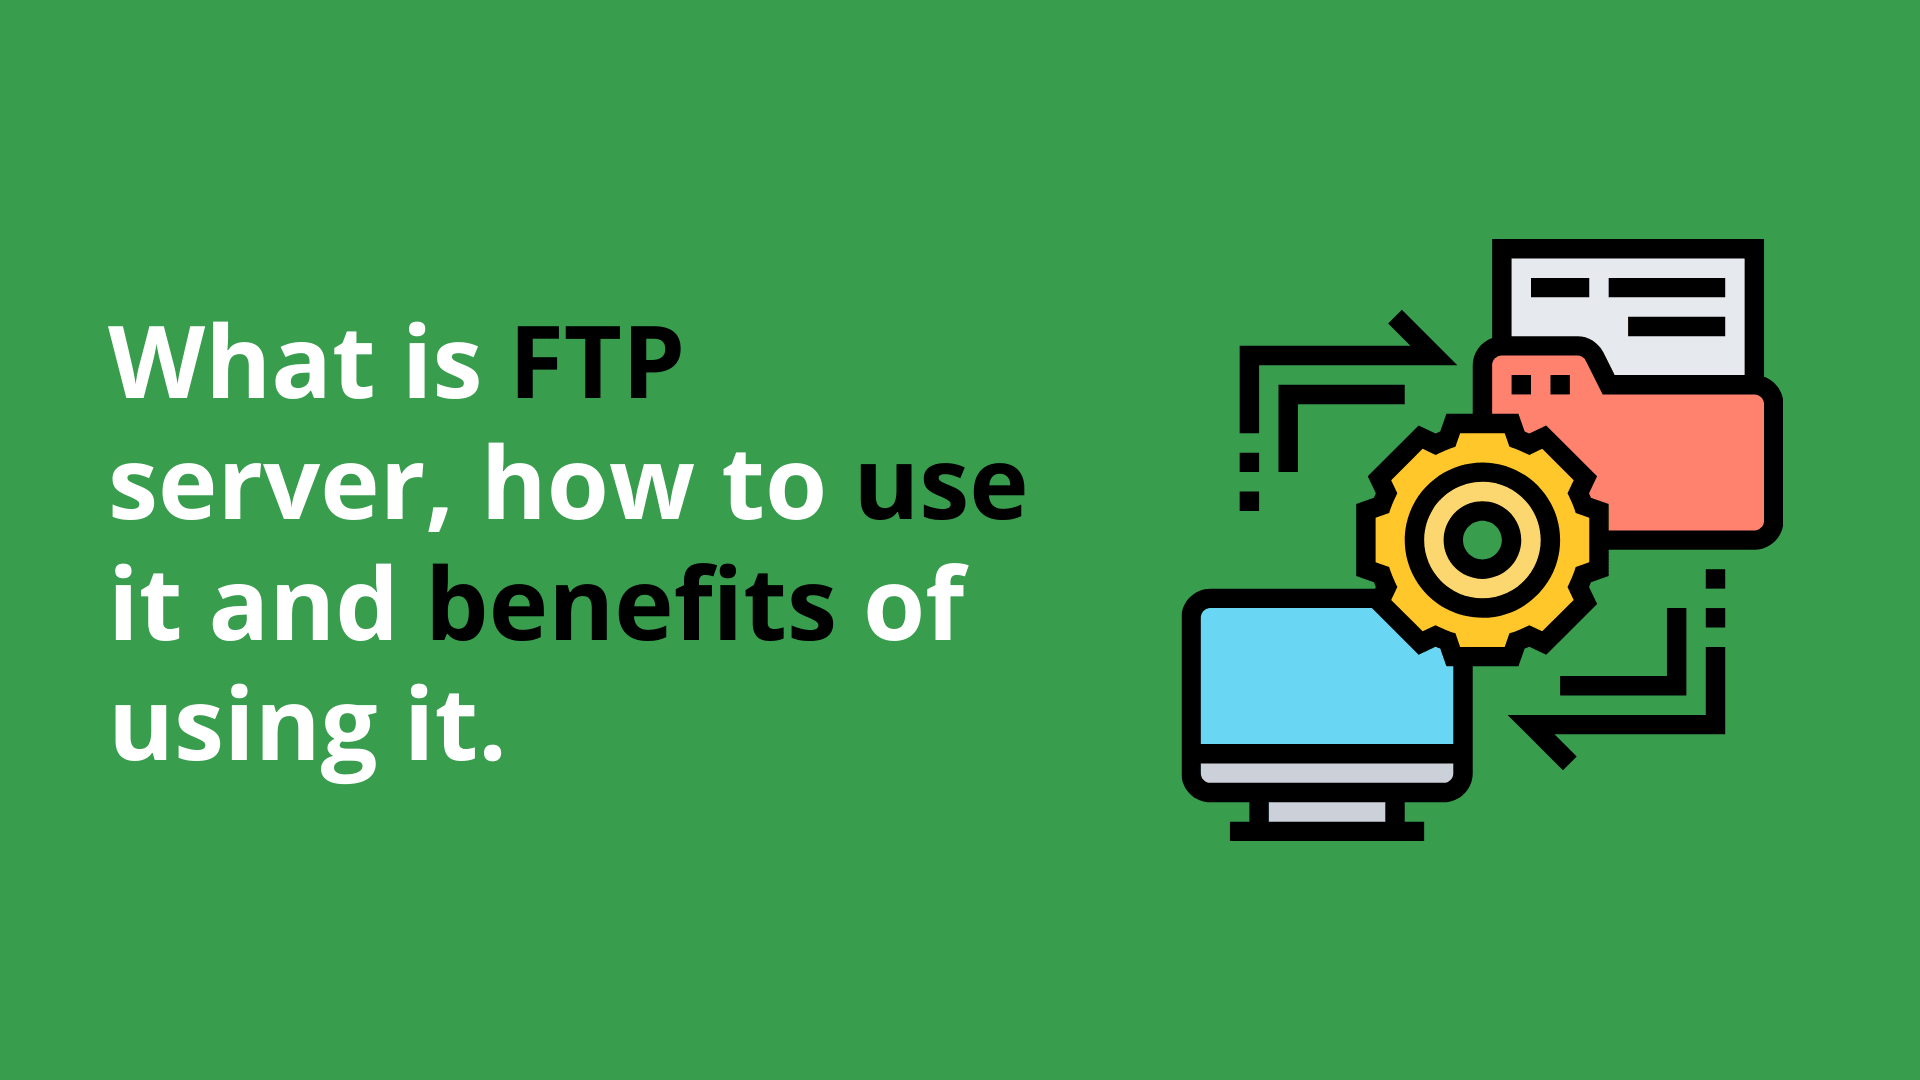 What is FTP Server and how to use it.